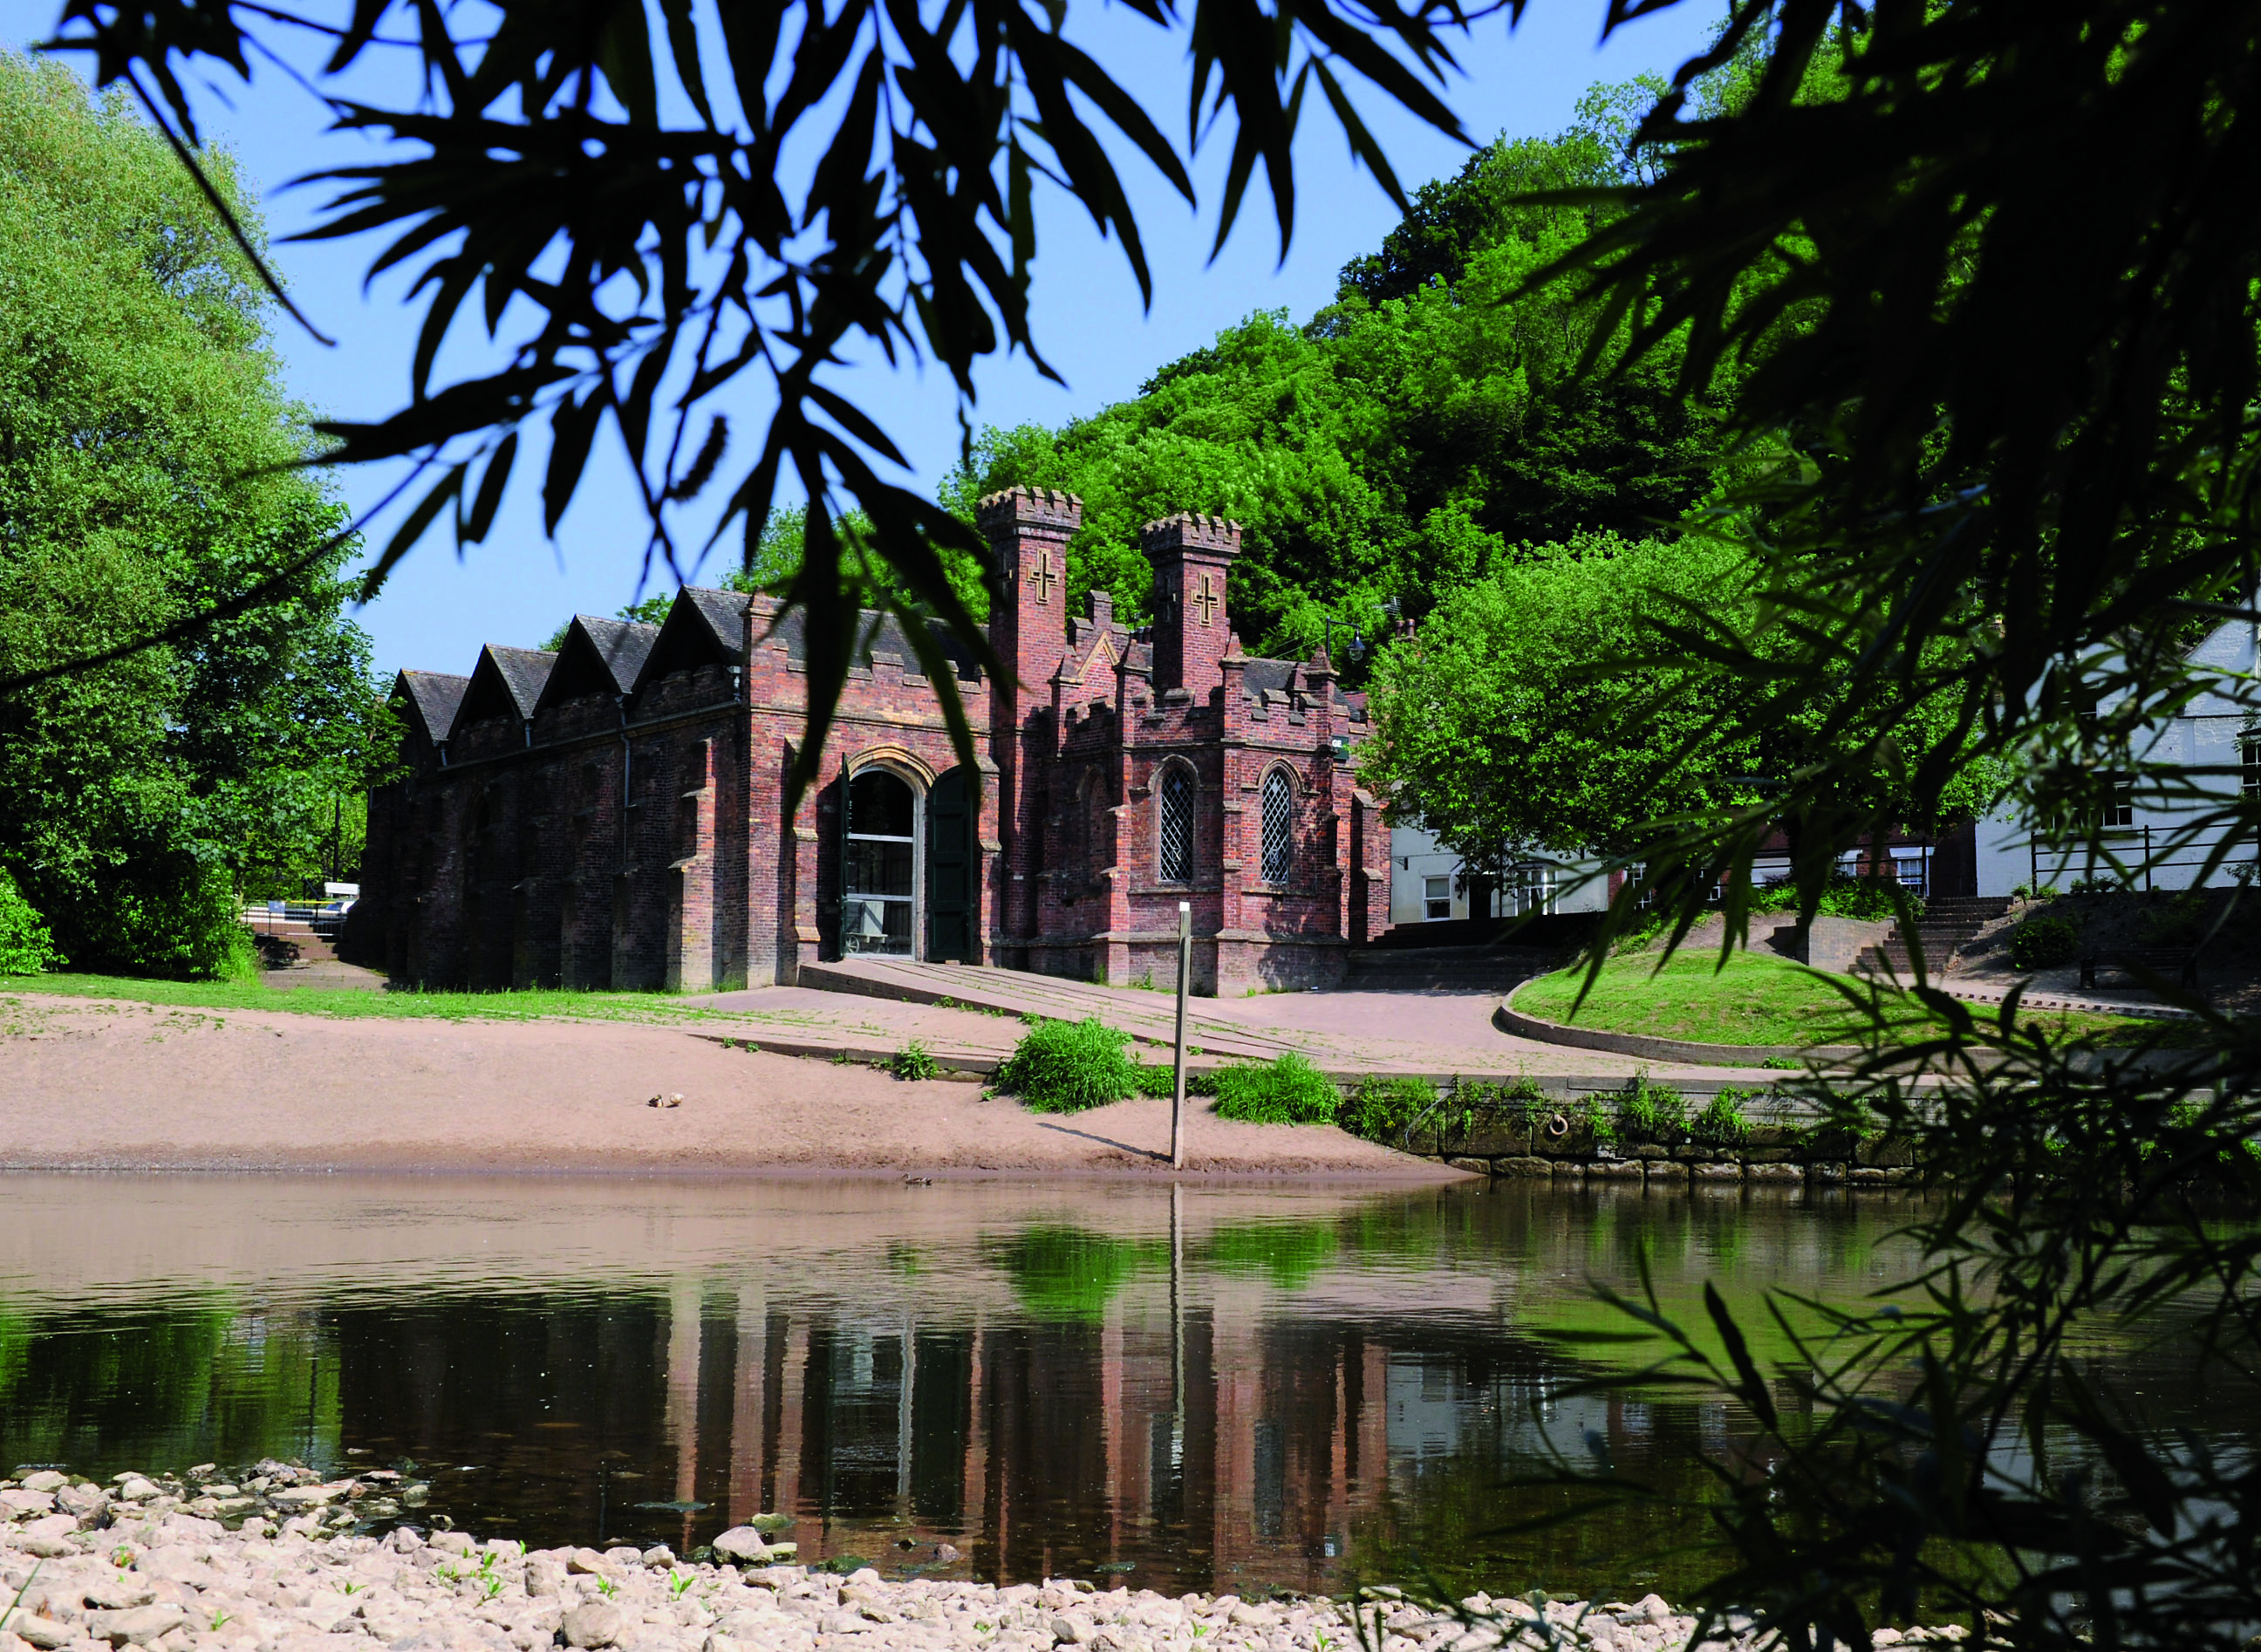 Ironbridge Gorge Museum Trust invites the public to share their ideas                   for the future use of the Museum of the Gorge